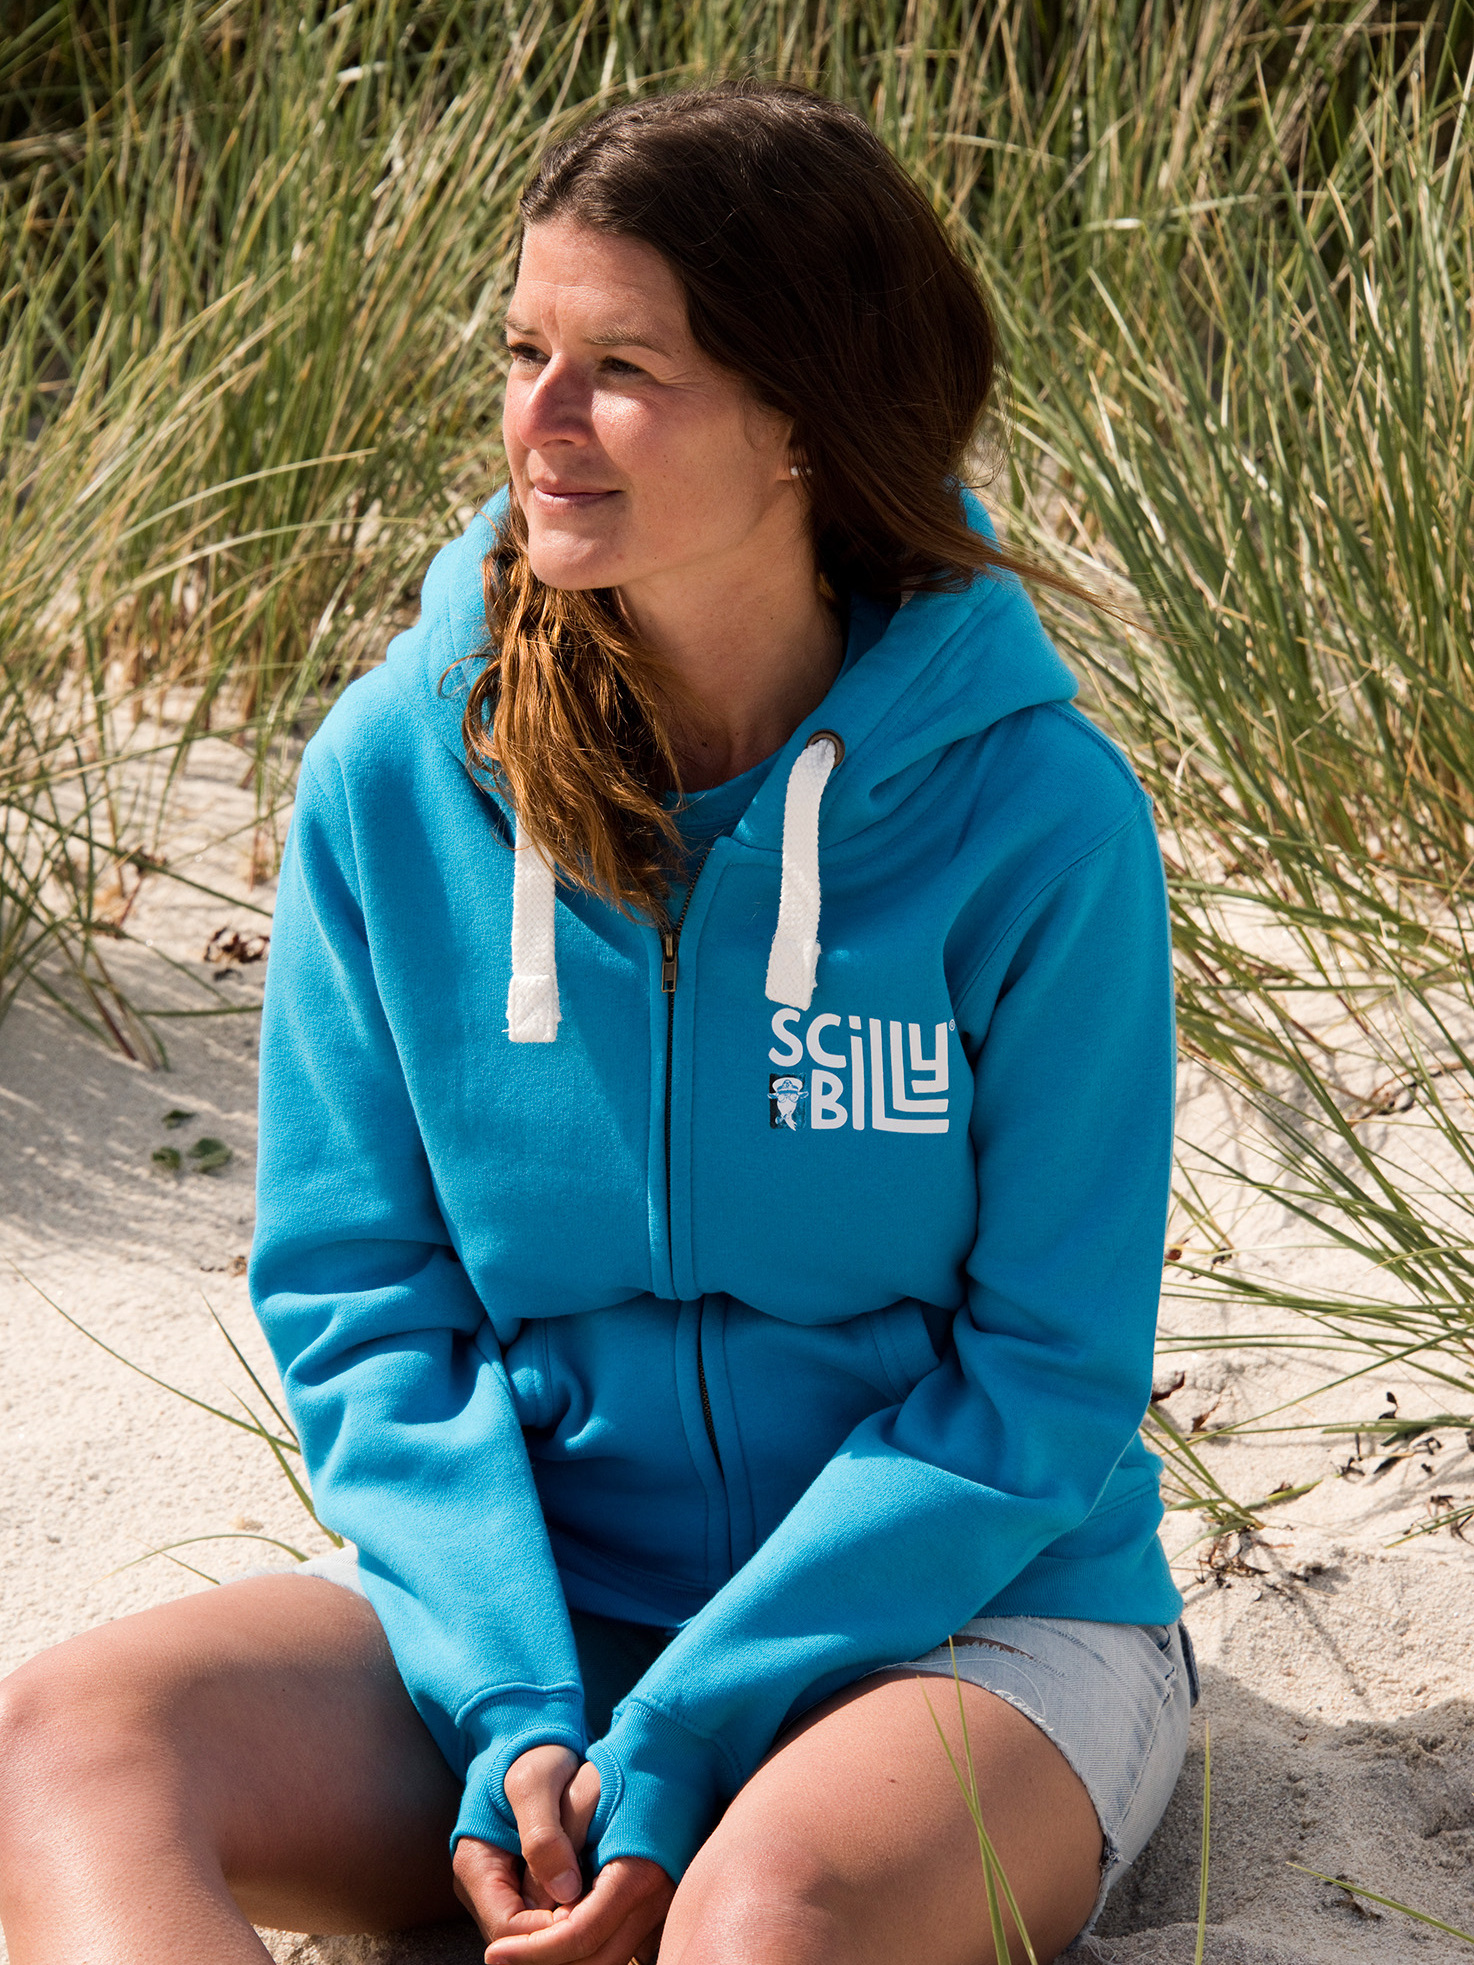 Scilly Sea ScillyBilly hoodie